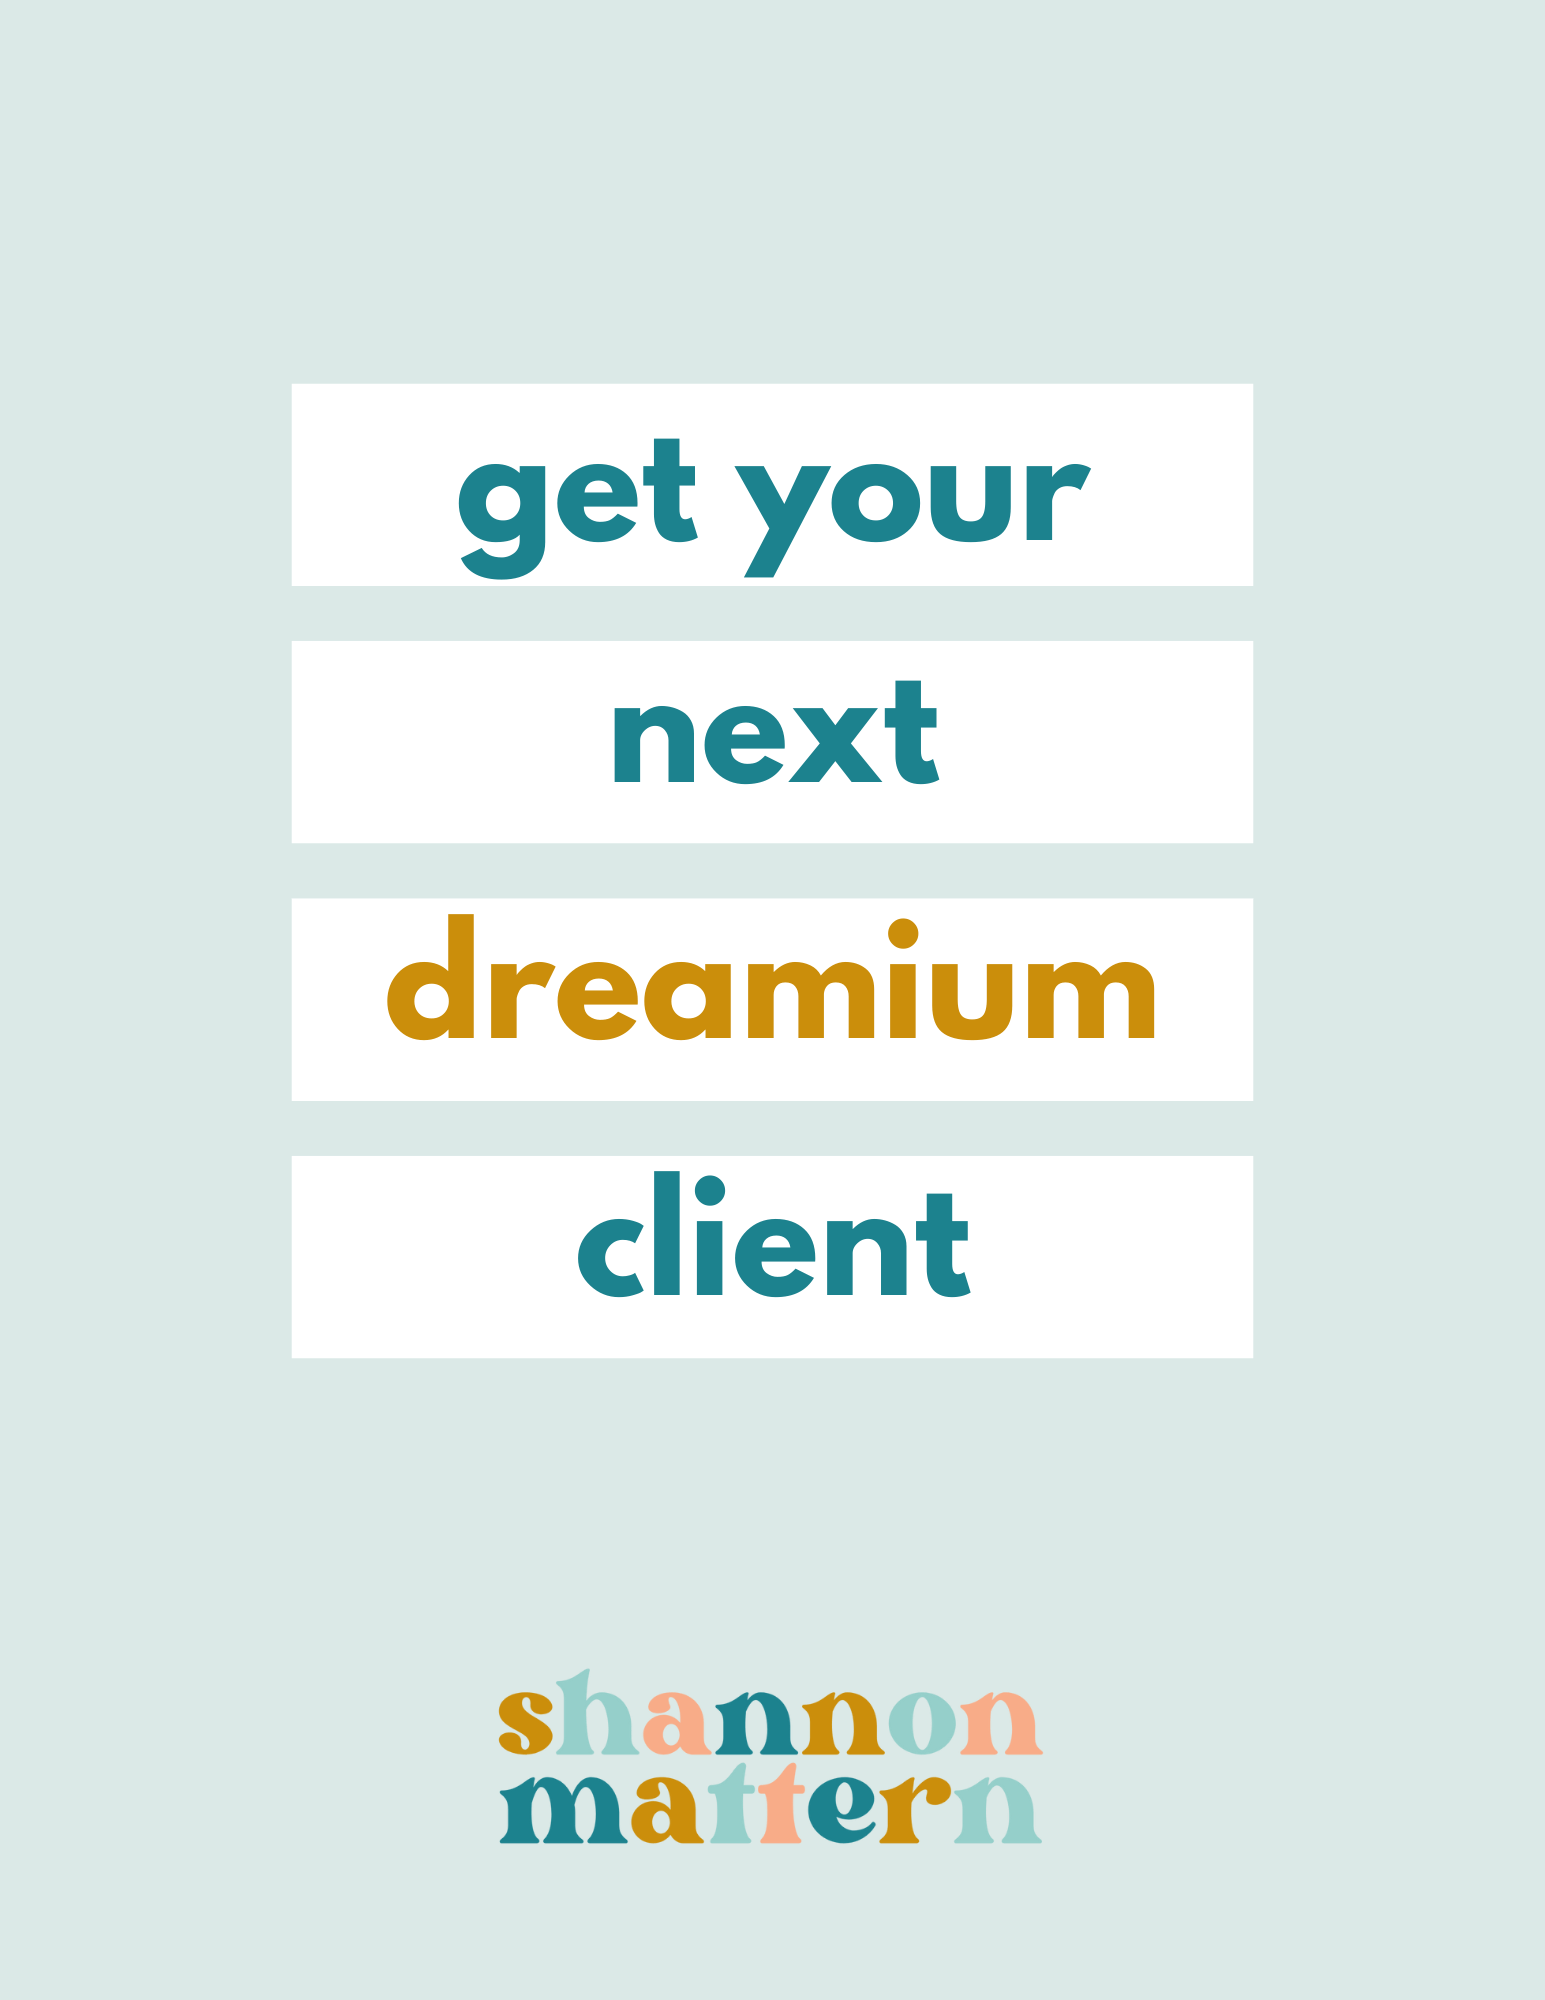 Shannon Mattern is being introduced as a new client of Dreamium. Full Text: get your next dreamium client shannon mattern